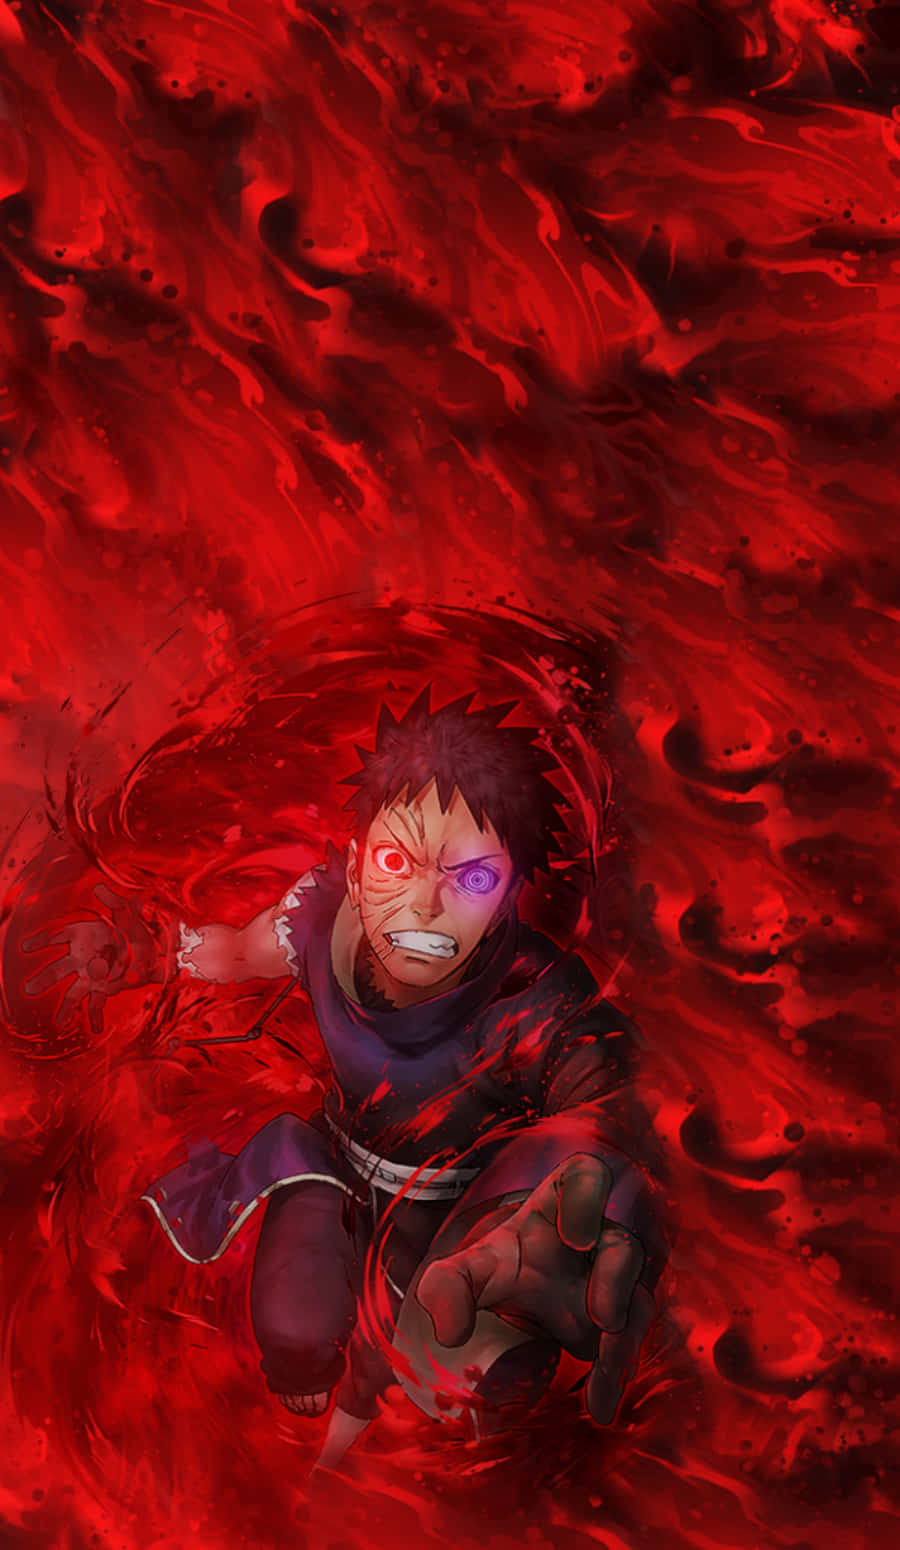 Get inspired by Obito's strong will and determination to make an impact. Wallpaper